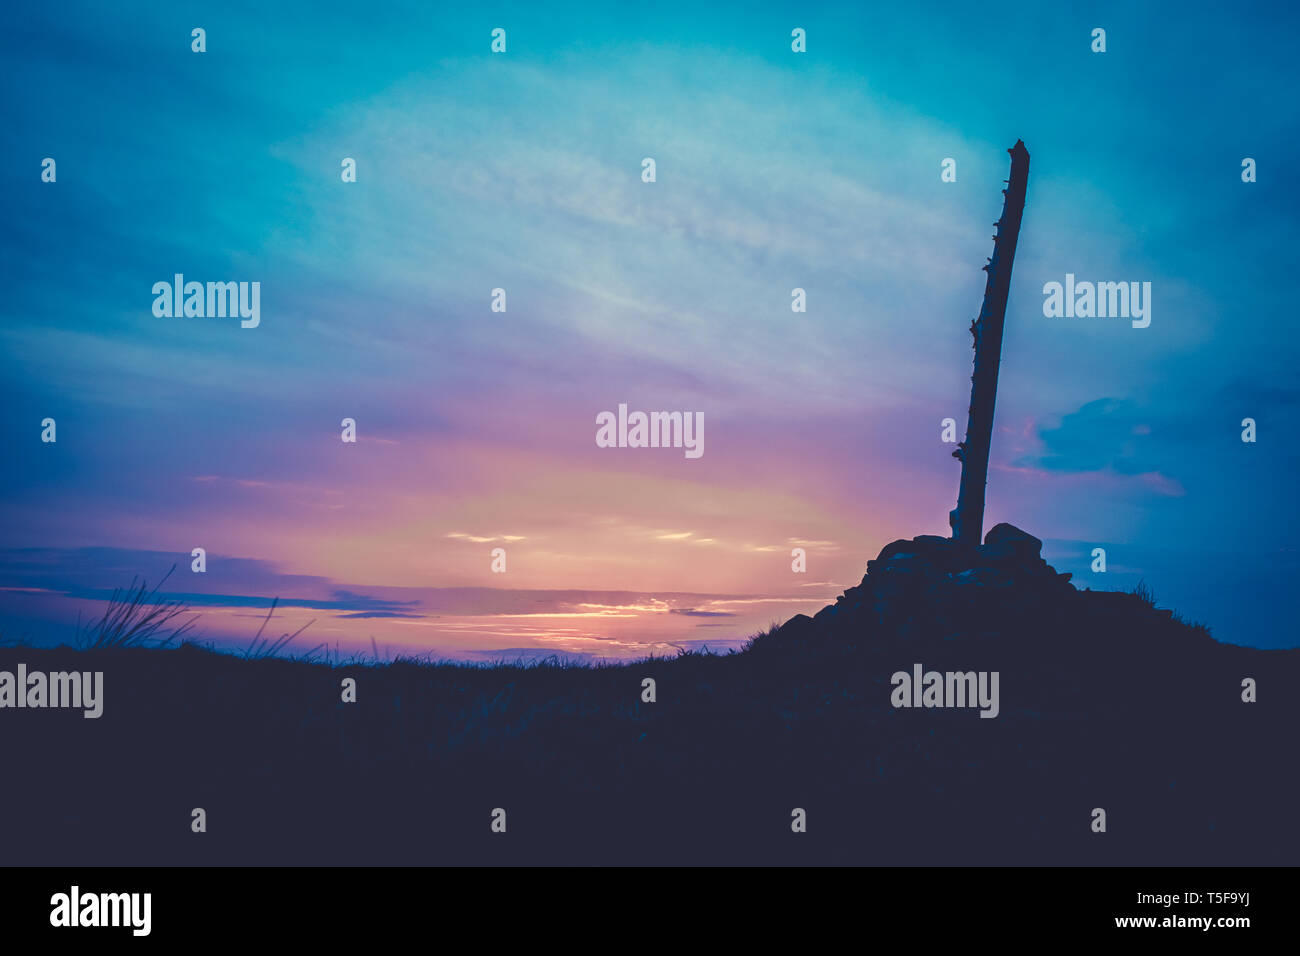 Beautiful Cairn (Pile of Stones Marking a Mountain Top) At Sunset In Scotland With Copy Space Stock Photo